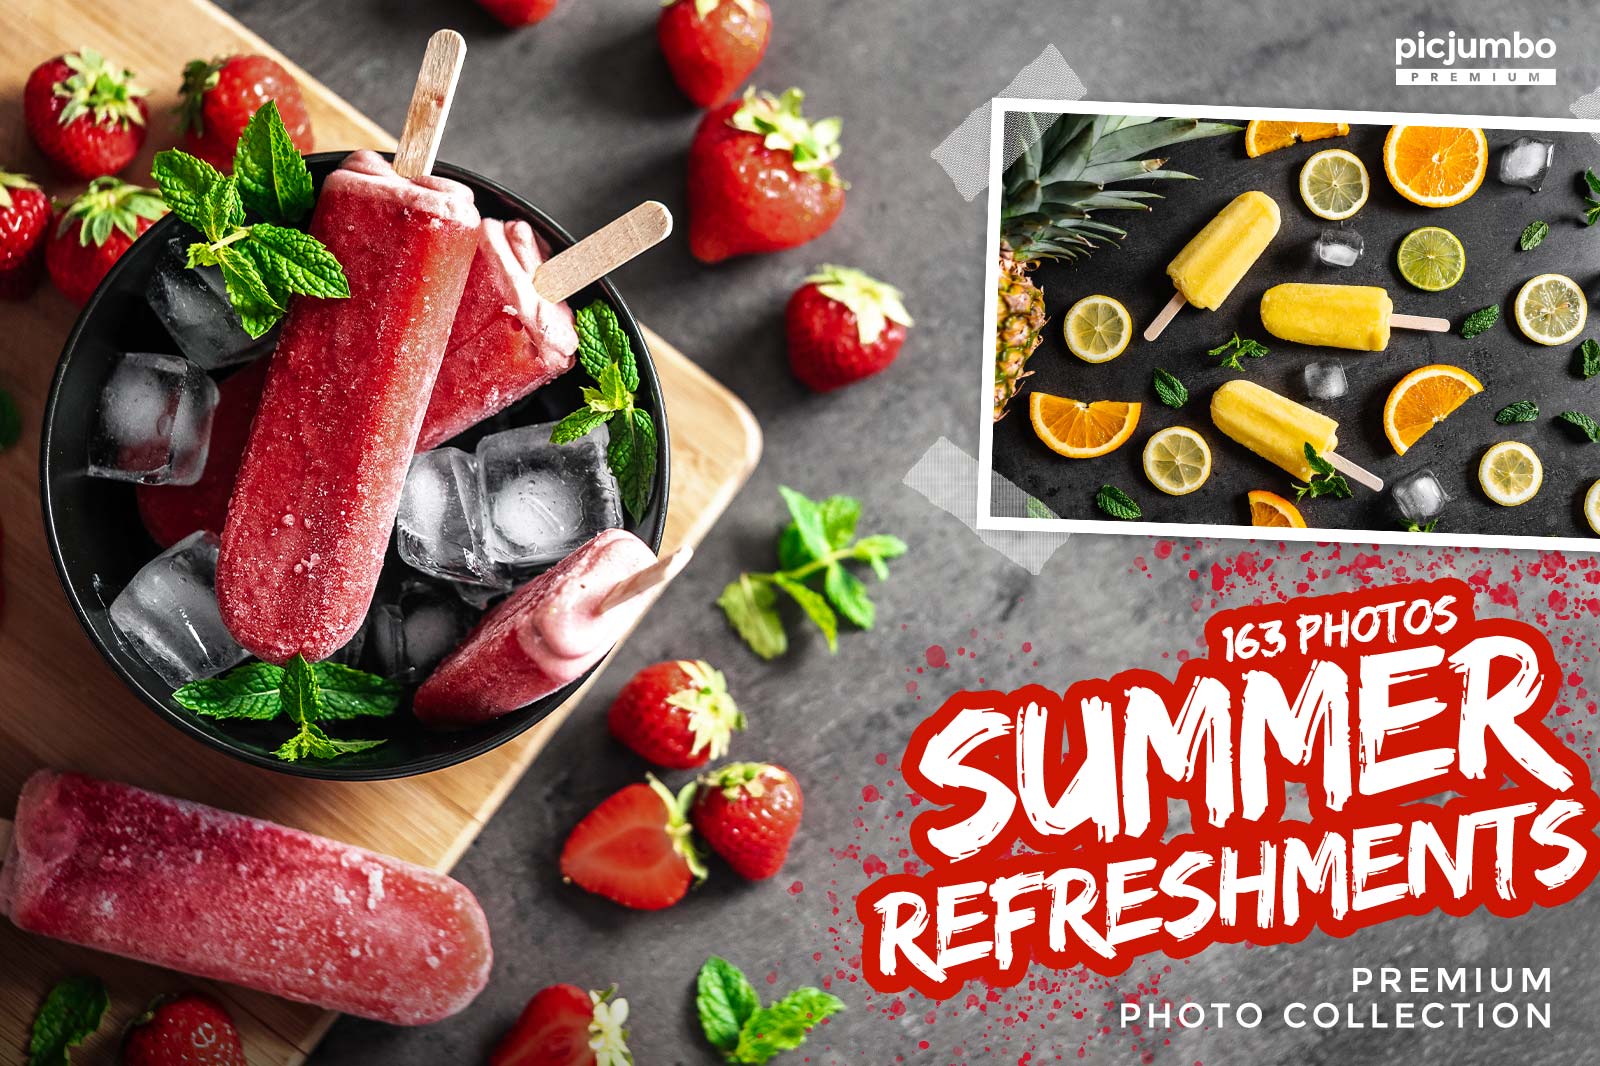 Download hi-res stock photos from our Summer Refreshments PREMIUM Collection!